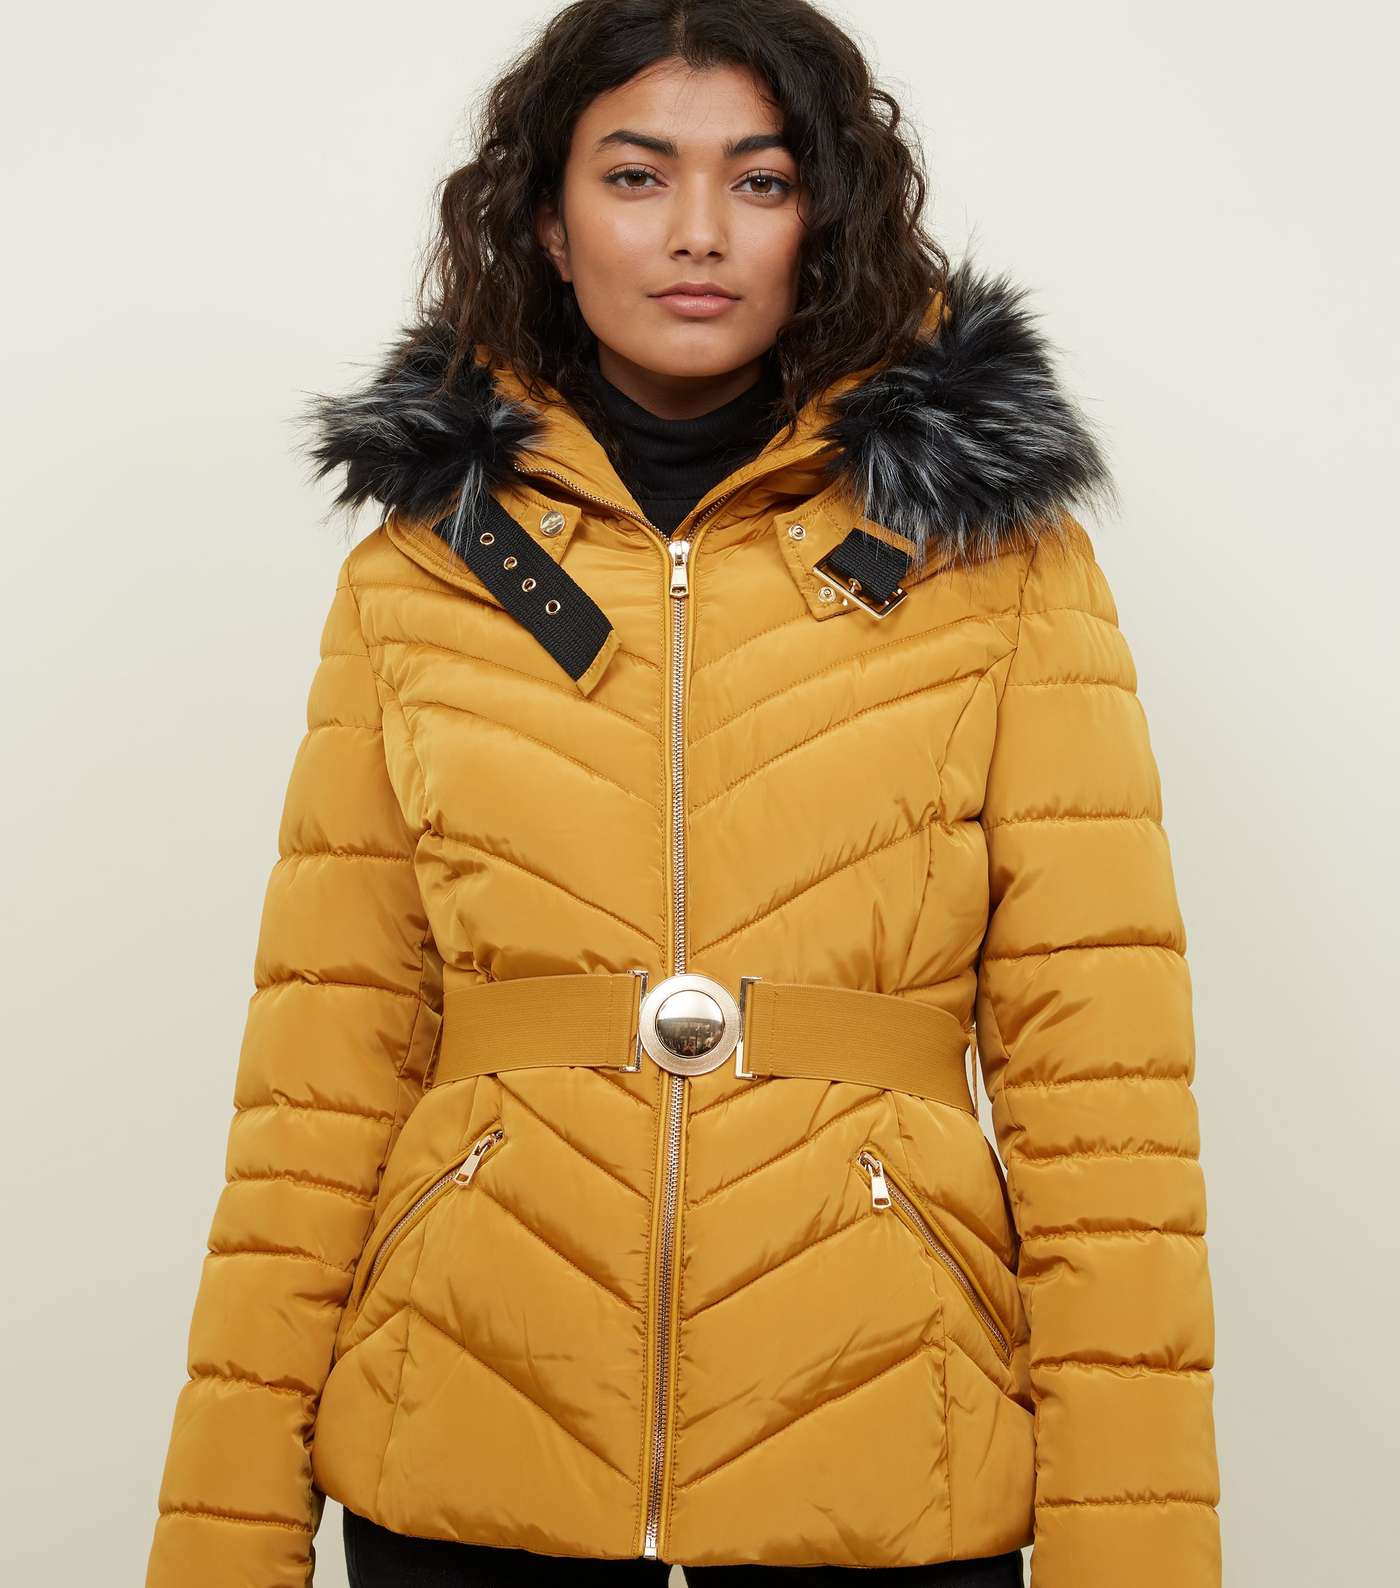 Cameo Rose Mustard Belted Puffer Jacket